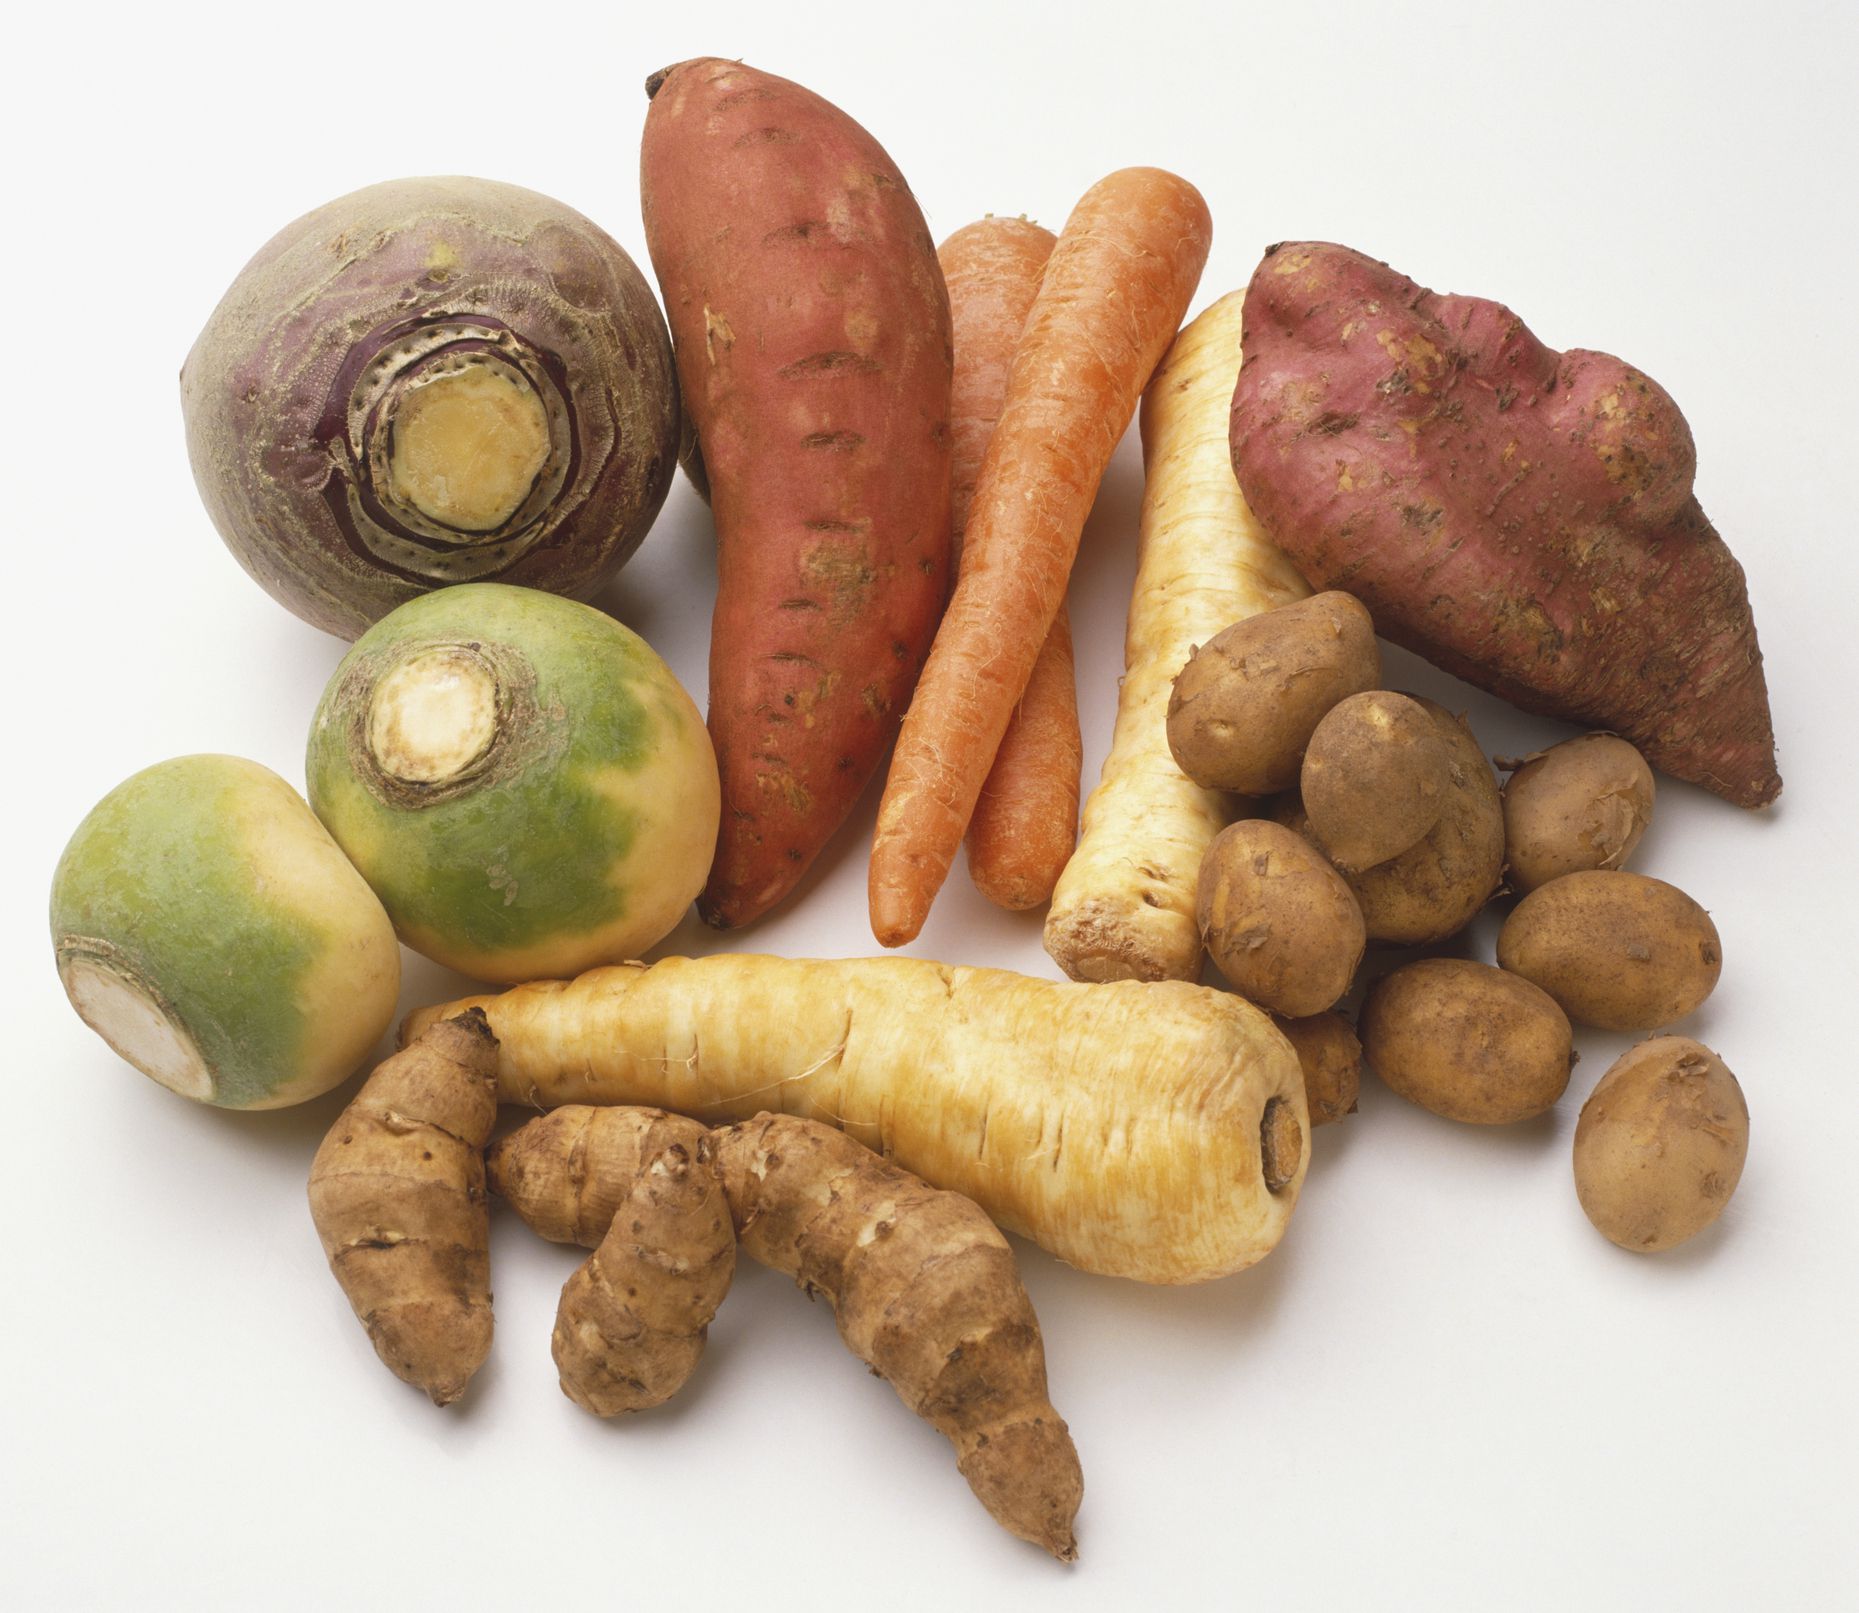 10 Ways to Use Root Vegetables